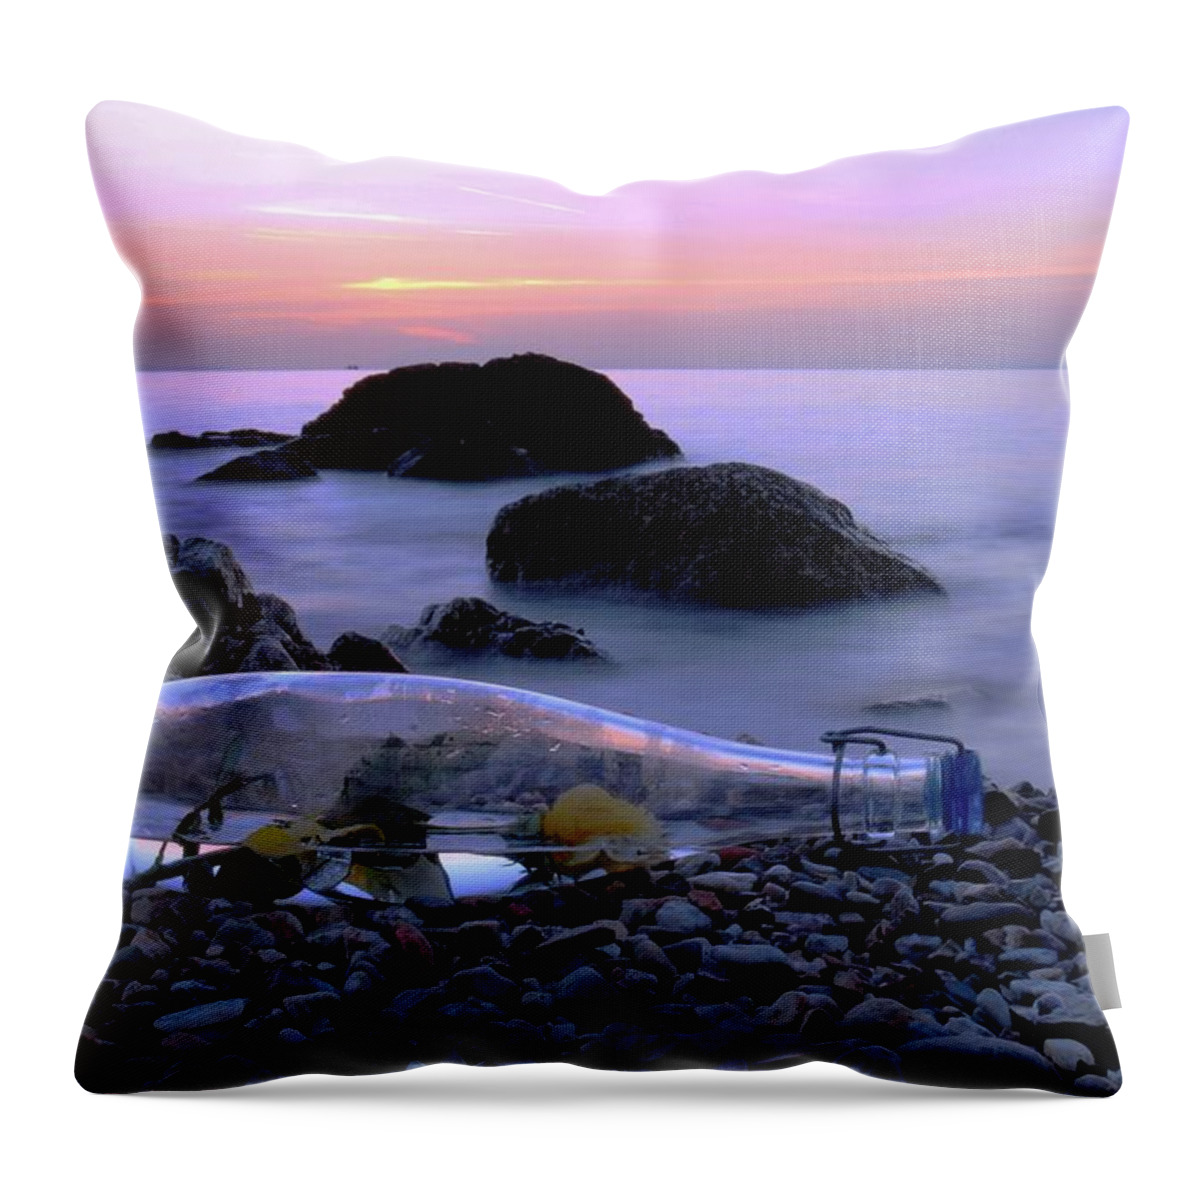 Scenics Throw Pillow featuring the photograph Youve Got Message by Iliaso